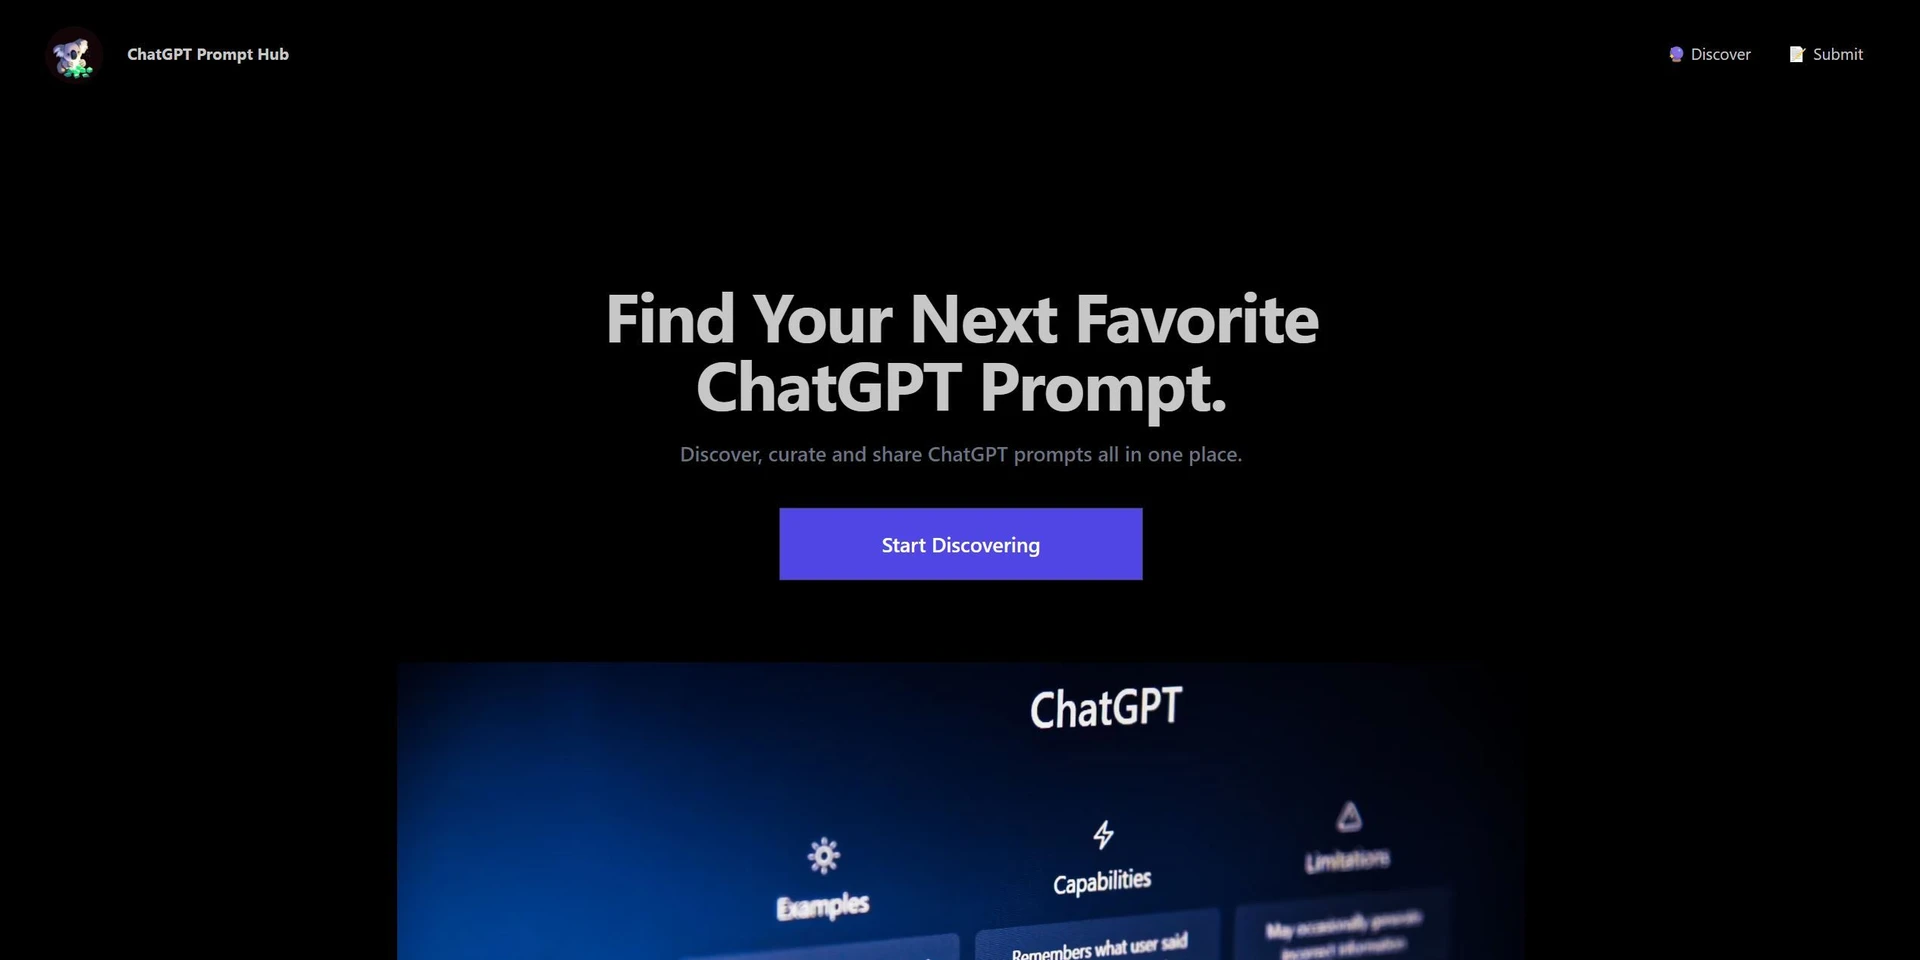 Chat GPT Prompt Hubwebsite picture